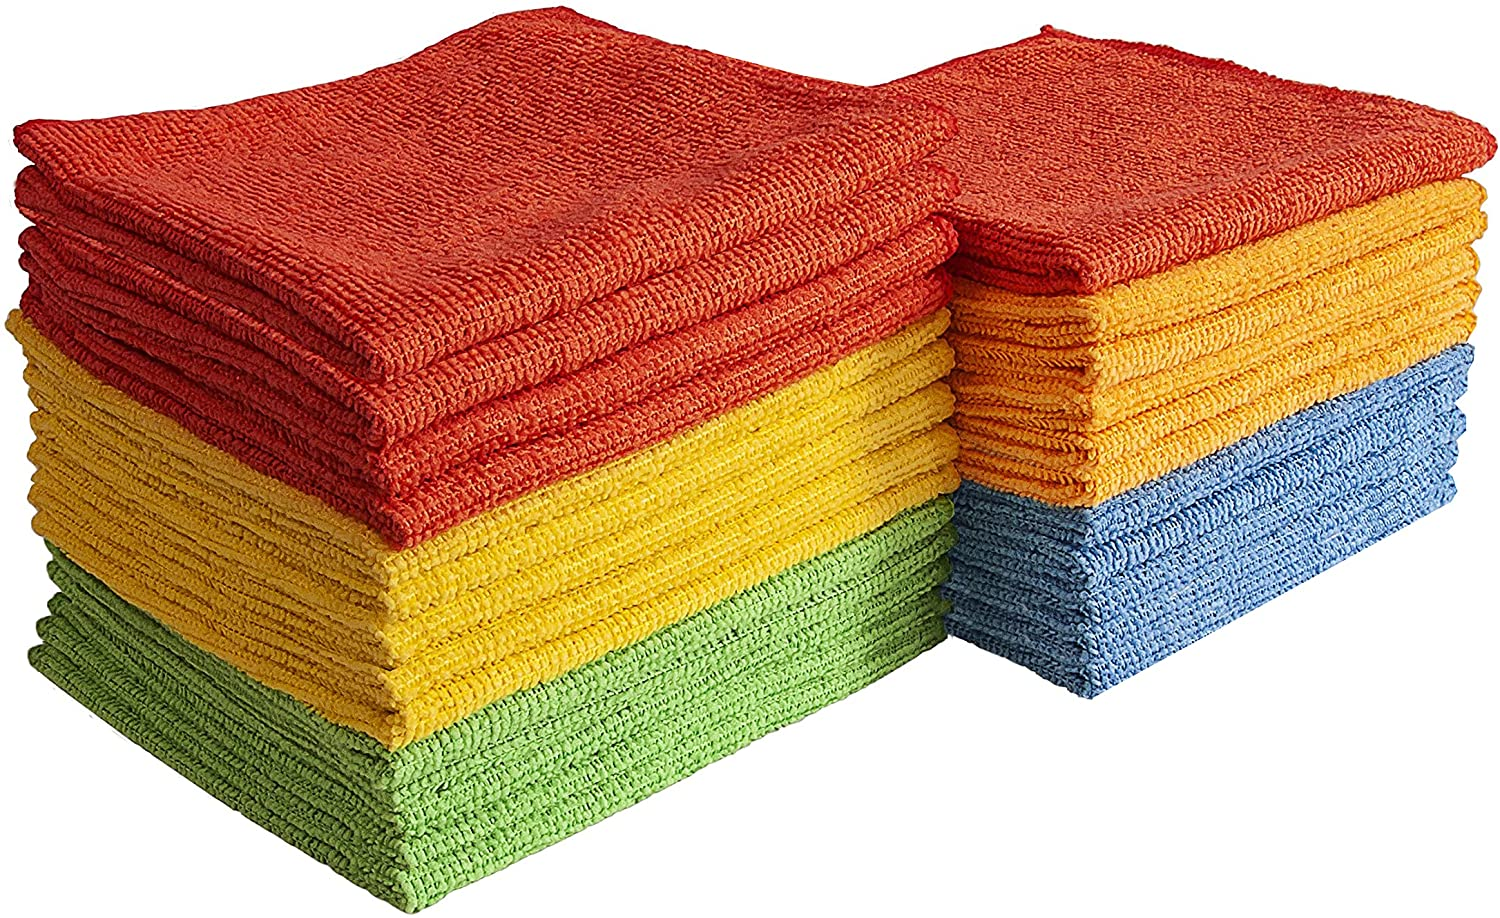 Microfiber Cleaning Cloths for Home, Kitchen, and Auto Detailing, 11.5 by 11.5 Inches, 5 Colors, 25 Pack